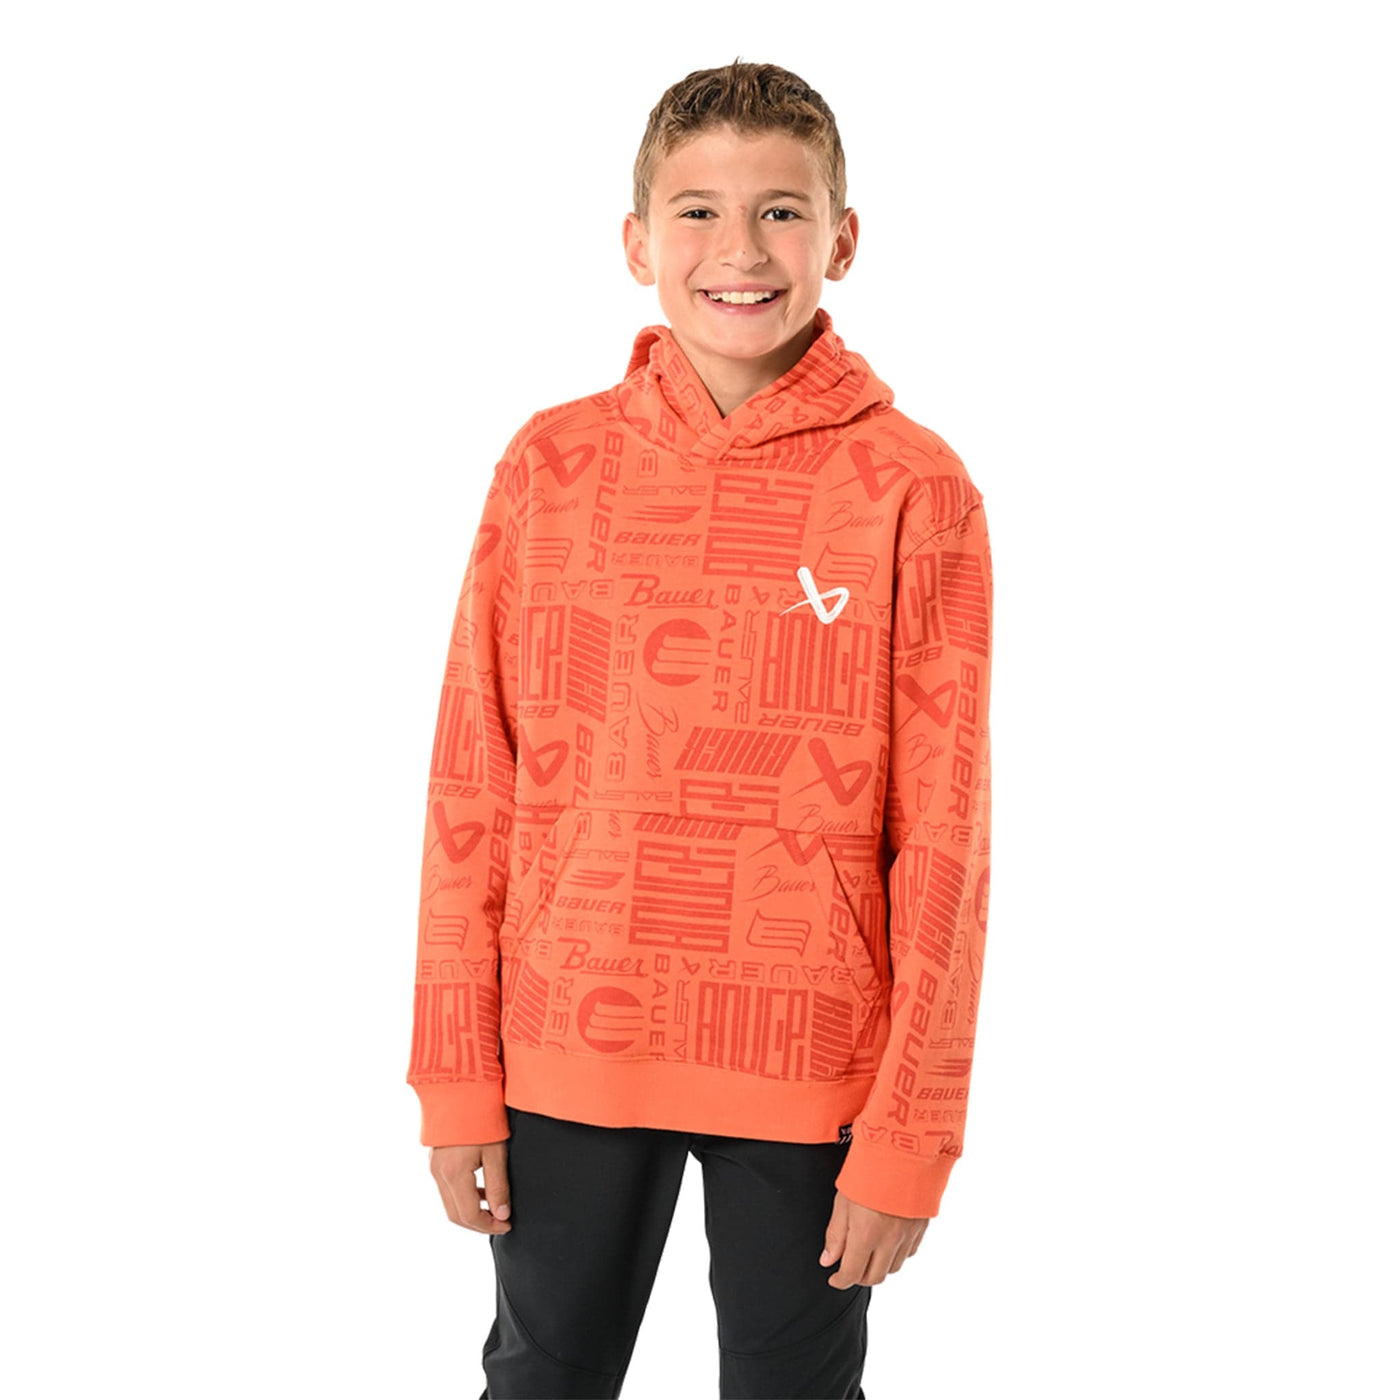 Bauer Logo Repeat Youth Hoody - Orange - The Hockey Shop Source For Sports